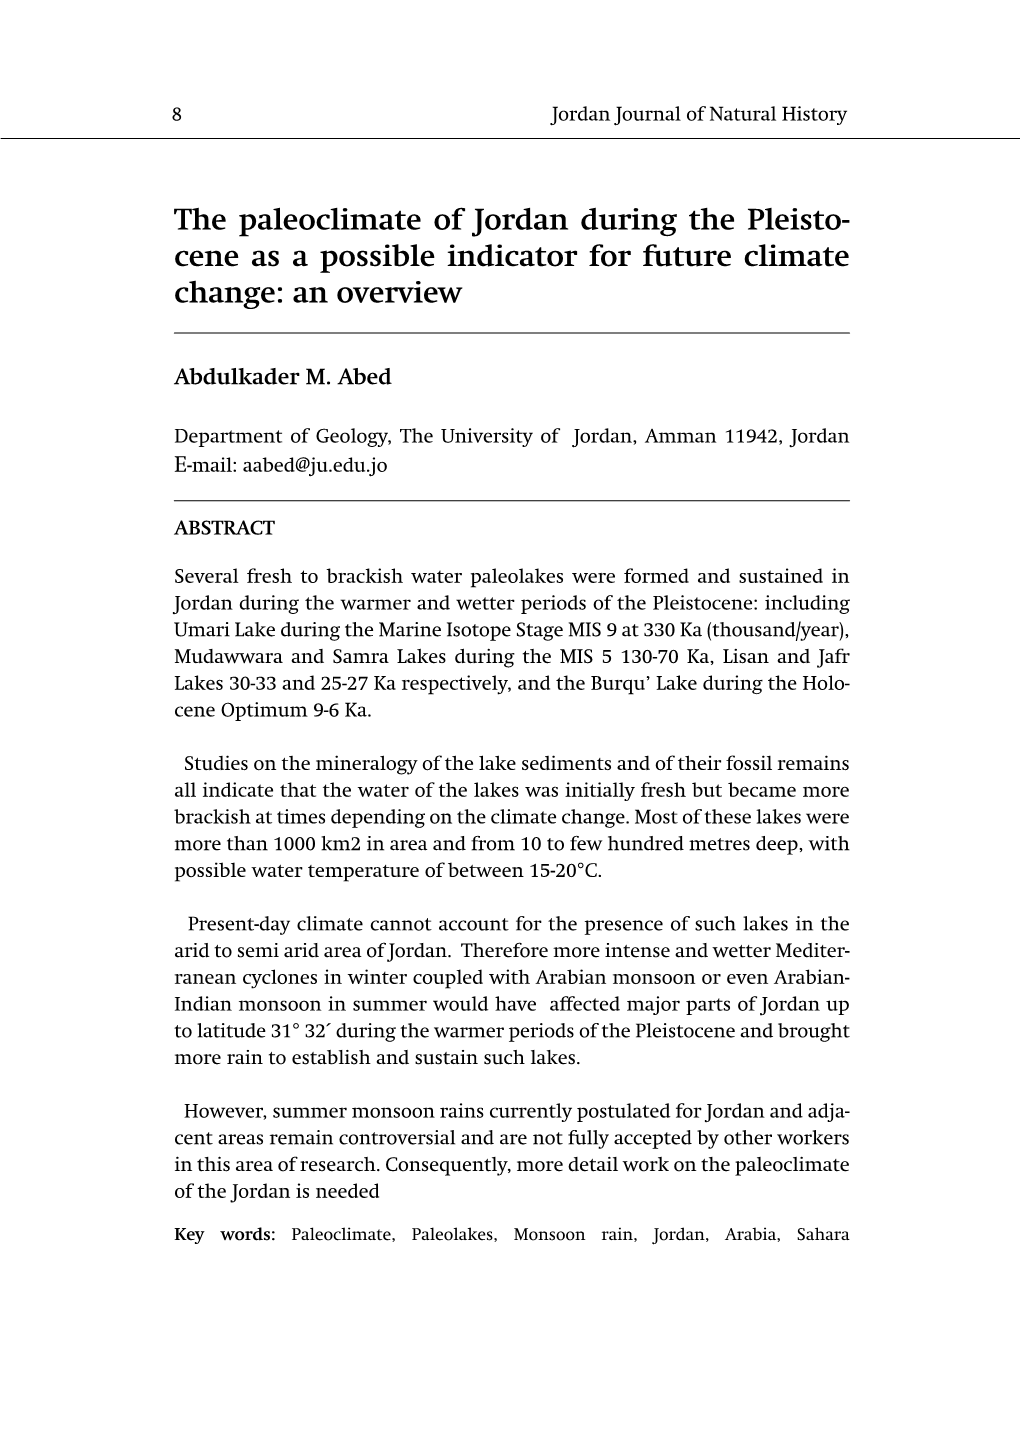 Cene As a Possible Indicator for Future Climate Change: an Overview